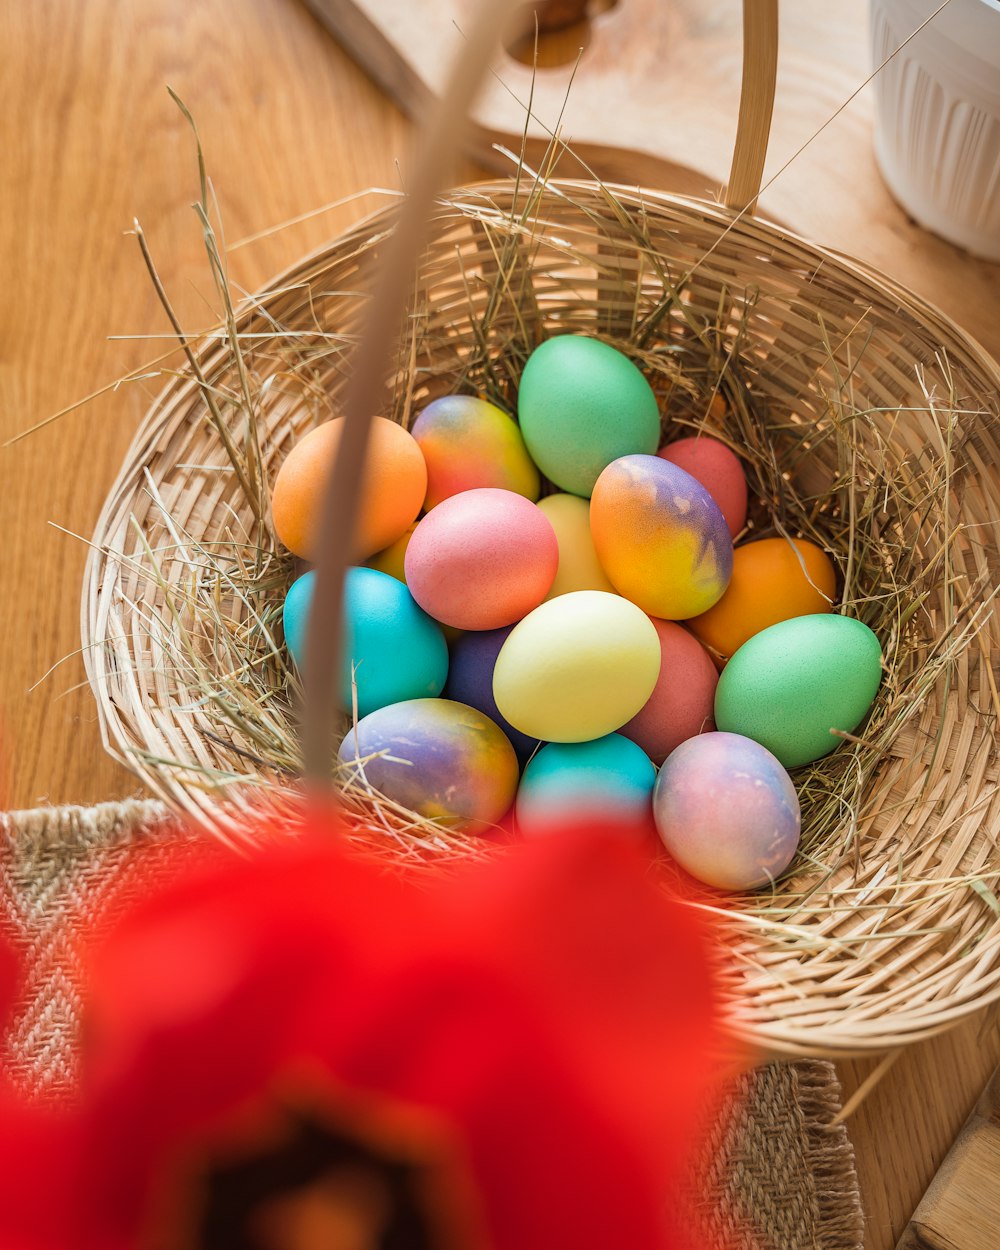 a basket filled with colored eggs on top of a wooden table